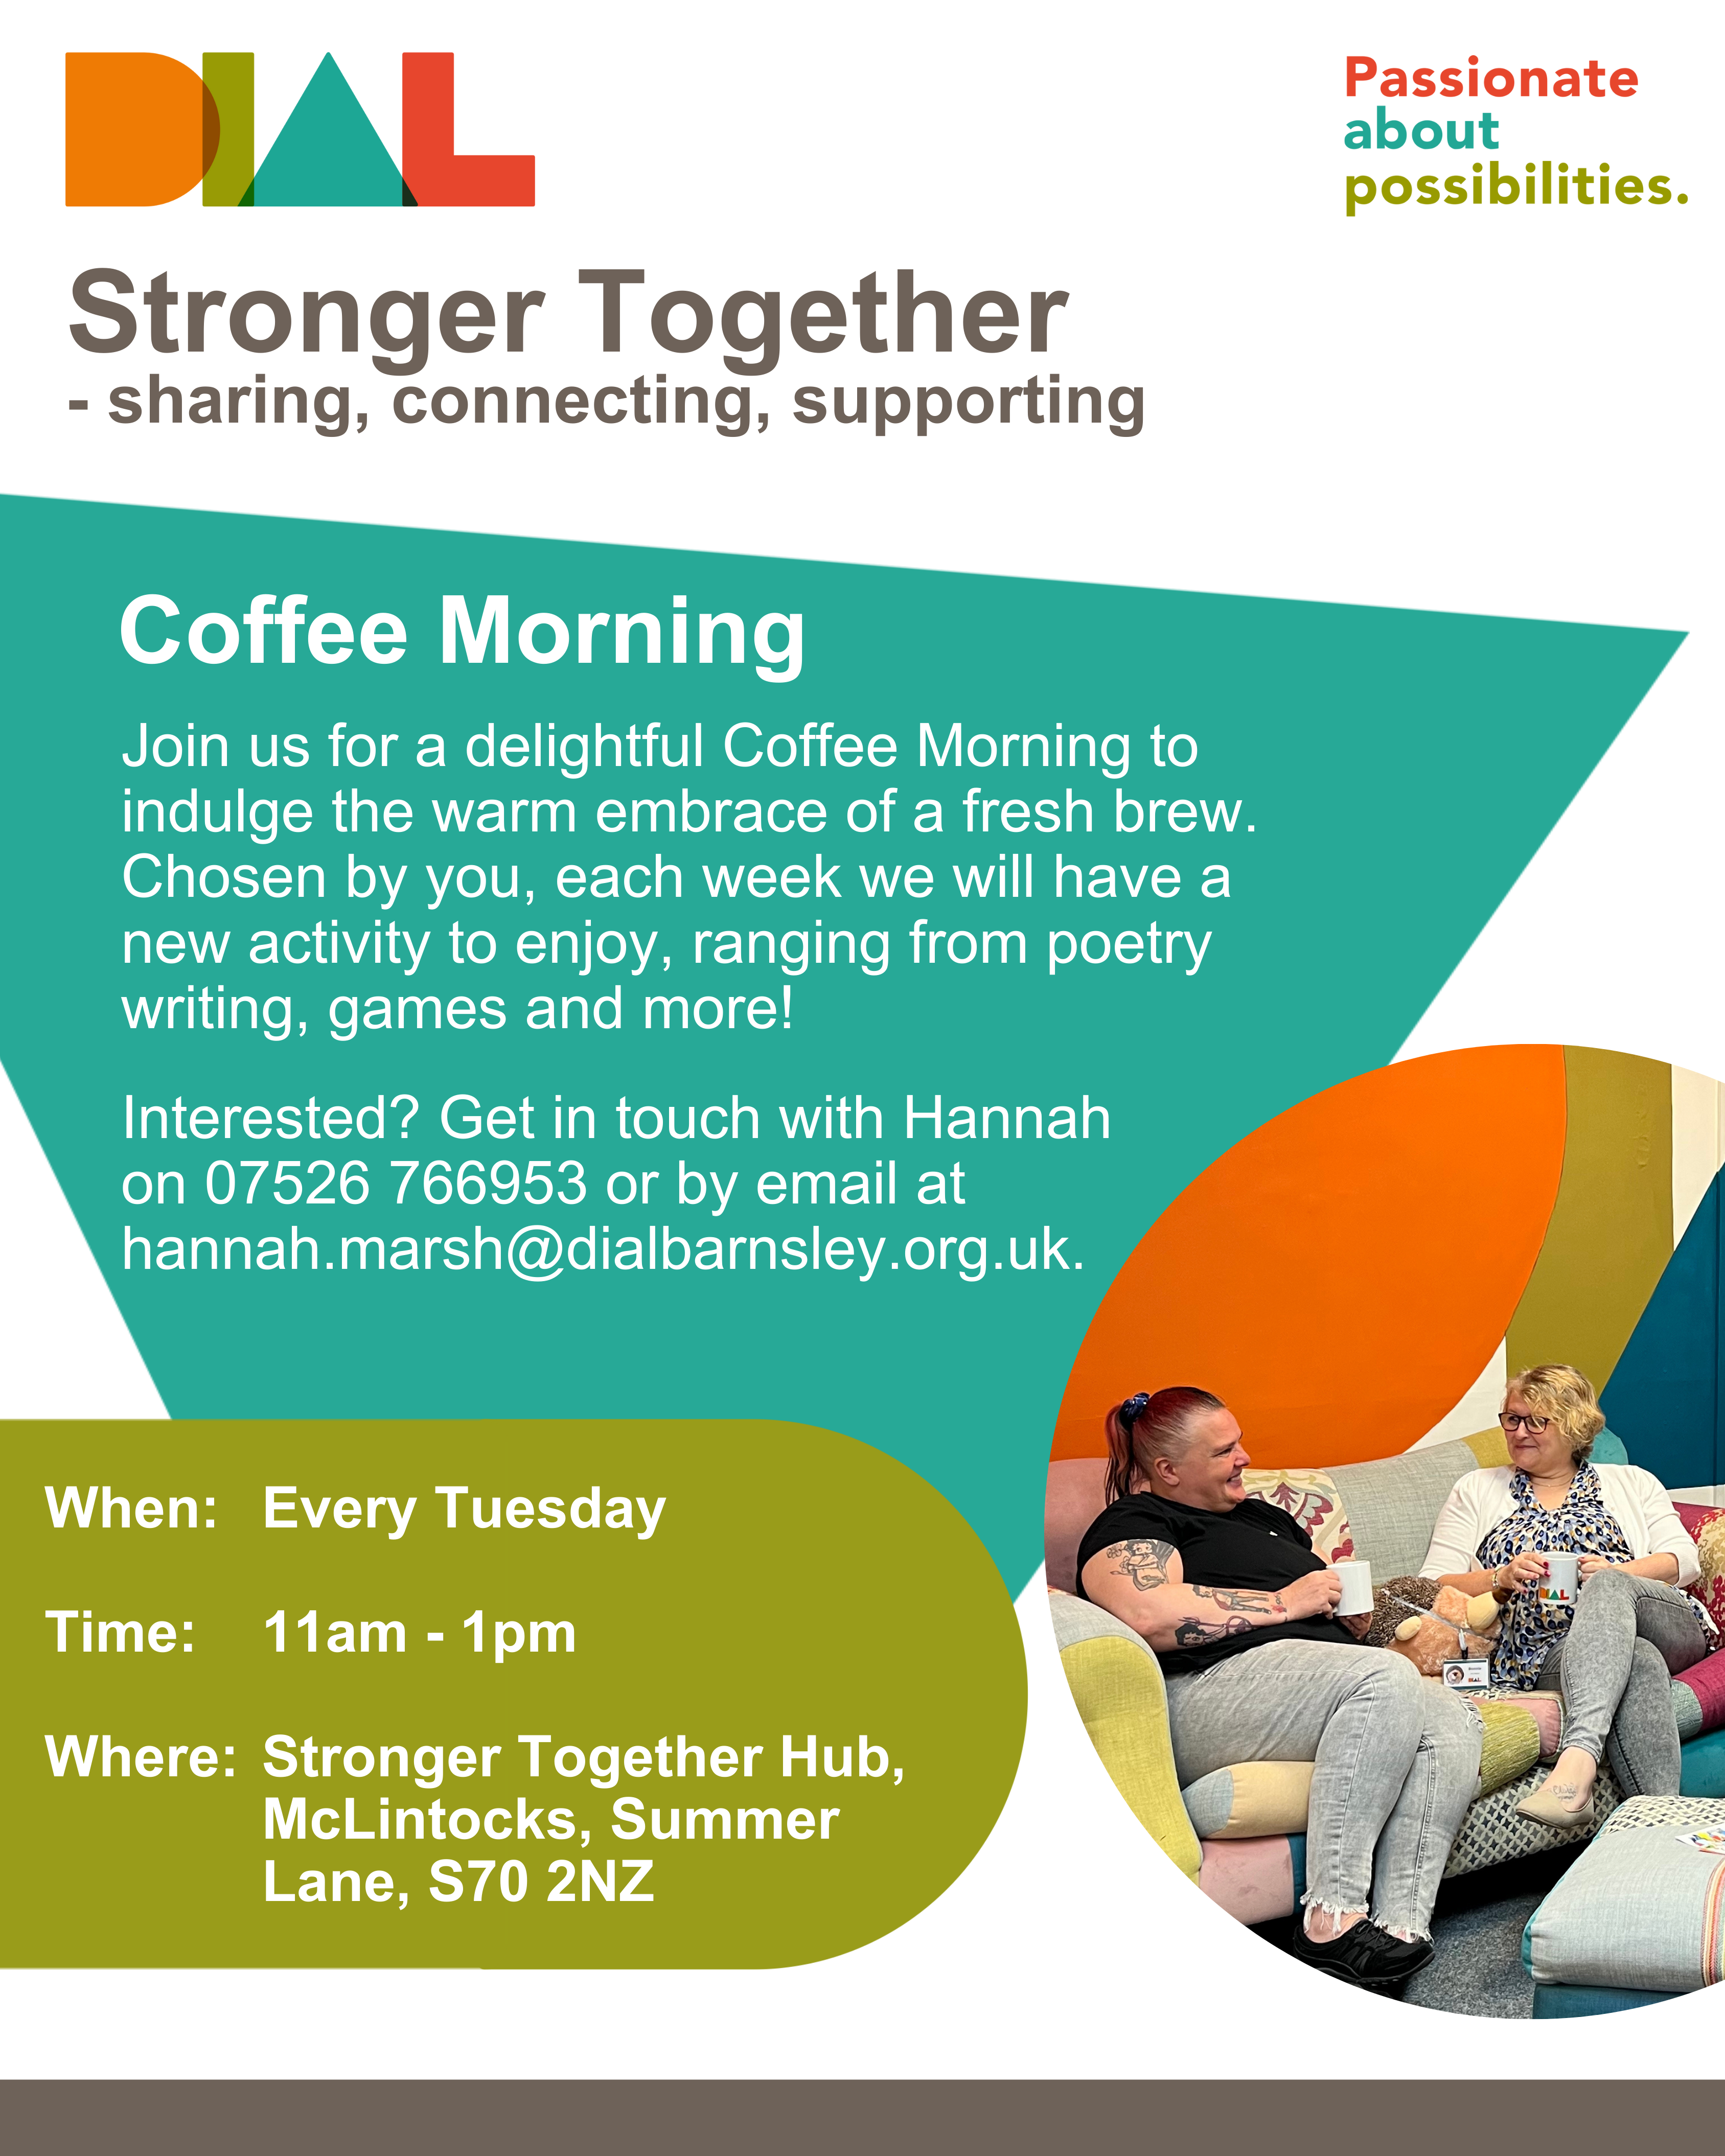 A poster for our Stronger Together Coffee Mornings. A white background and using DIAL colours of orange, green, teal and red. The poster includes the DIAL logo, each letter of DIAL being a different DIAL colour, and the tagline of ‘Passionate About Possibilities’. There is also an image of two white women sitting on the colourful patchwork sofa in our Stronger Together Hub, having a cuppa and chatting. The poster reads: Stronger Together - sharing, connecting, supporting. Join us for a delightful coffee morning to indulge the warm embrace of a fresh brew. Chosen by you, each week we will have a new activity to enjoy, ranging from poetry writing, games and more! Interested? Get in touch with Hannah on 07526 766953 or by email at hannah.marsh@dialbarnsley.org.uk. When: Tuesday , 11am - 1pm. Where: Stronger Together Hub, DIAL Office, McLintocks, Summer Lane, S70 2NZ.